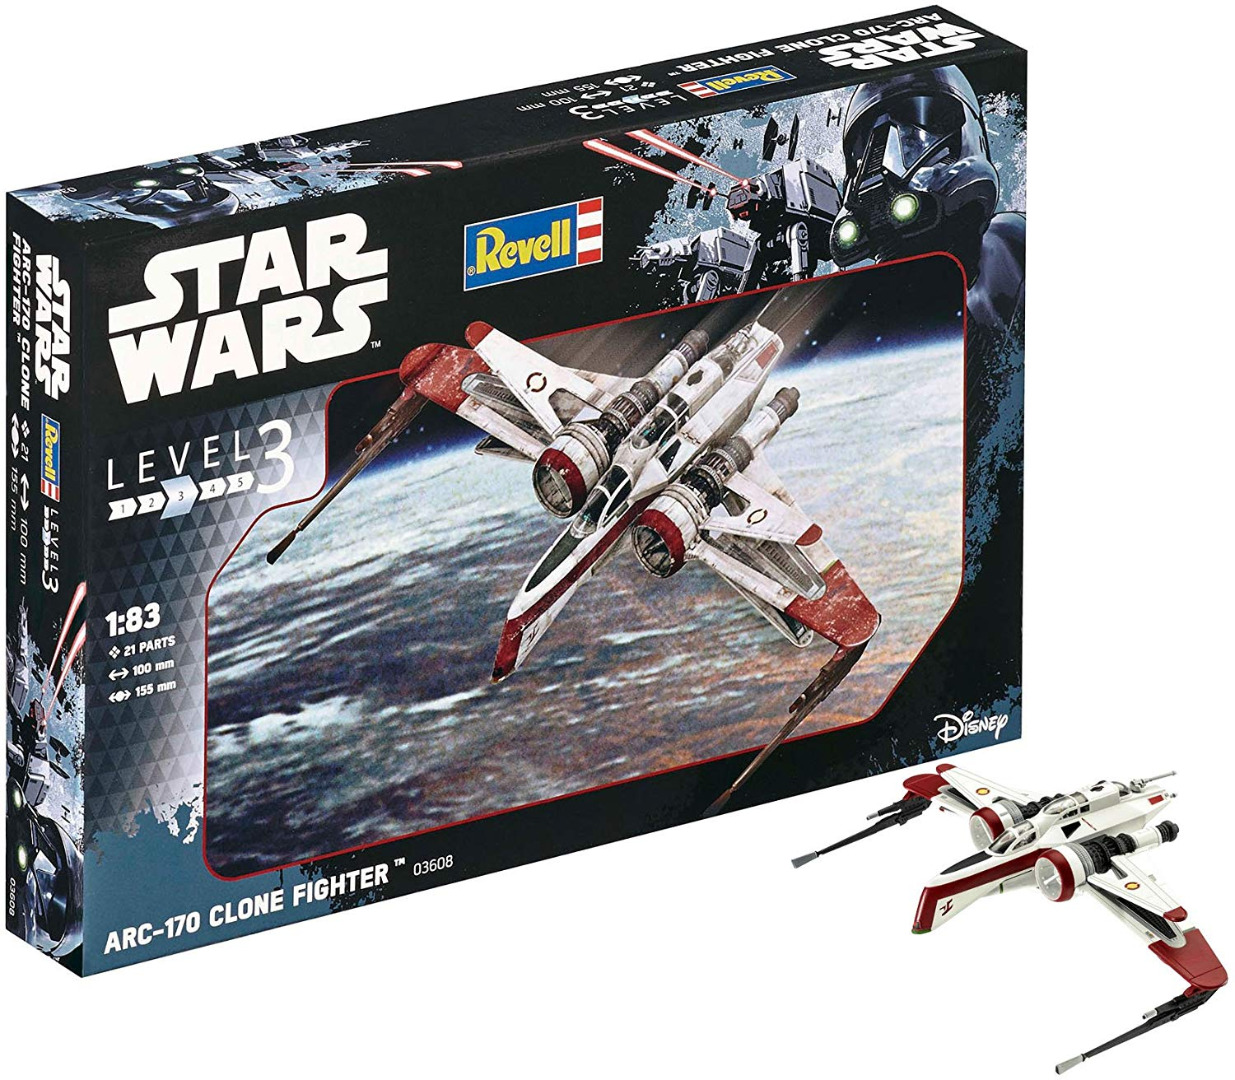 Star Wars Model Kit 1:83 Rogue One ARC-170 Fighter 10 cm